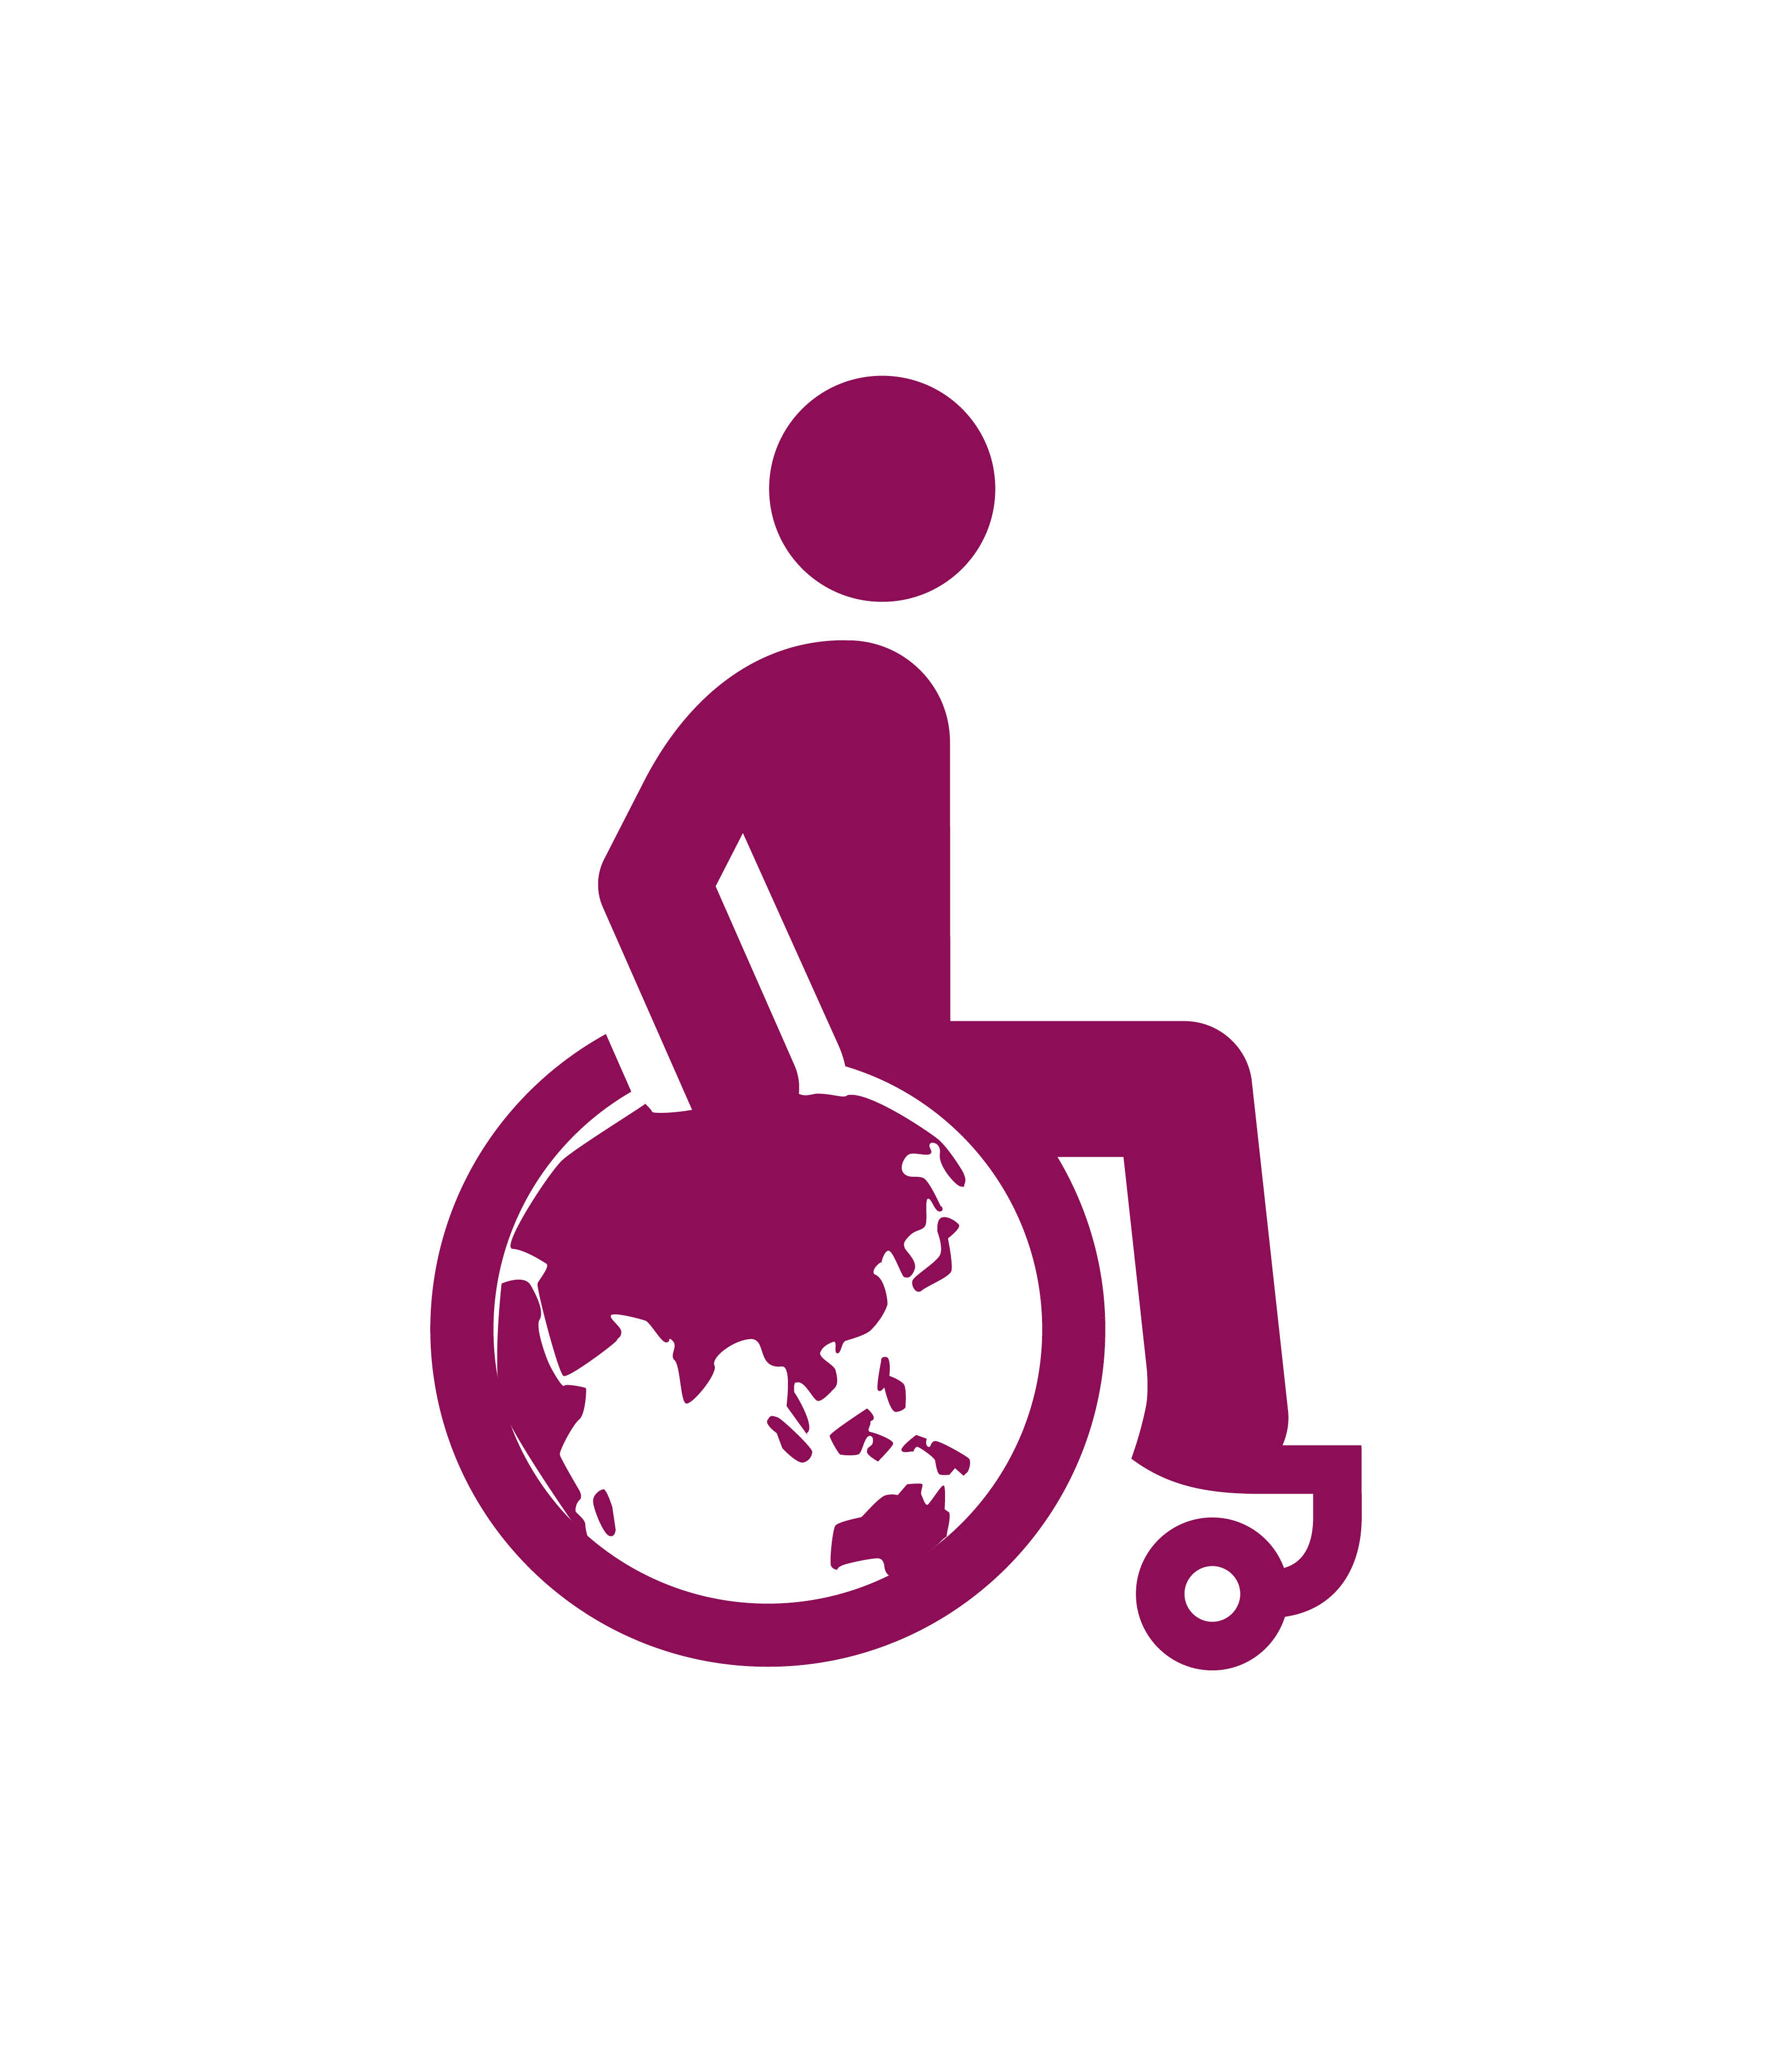 Wheelchair with a globe in the wheel